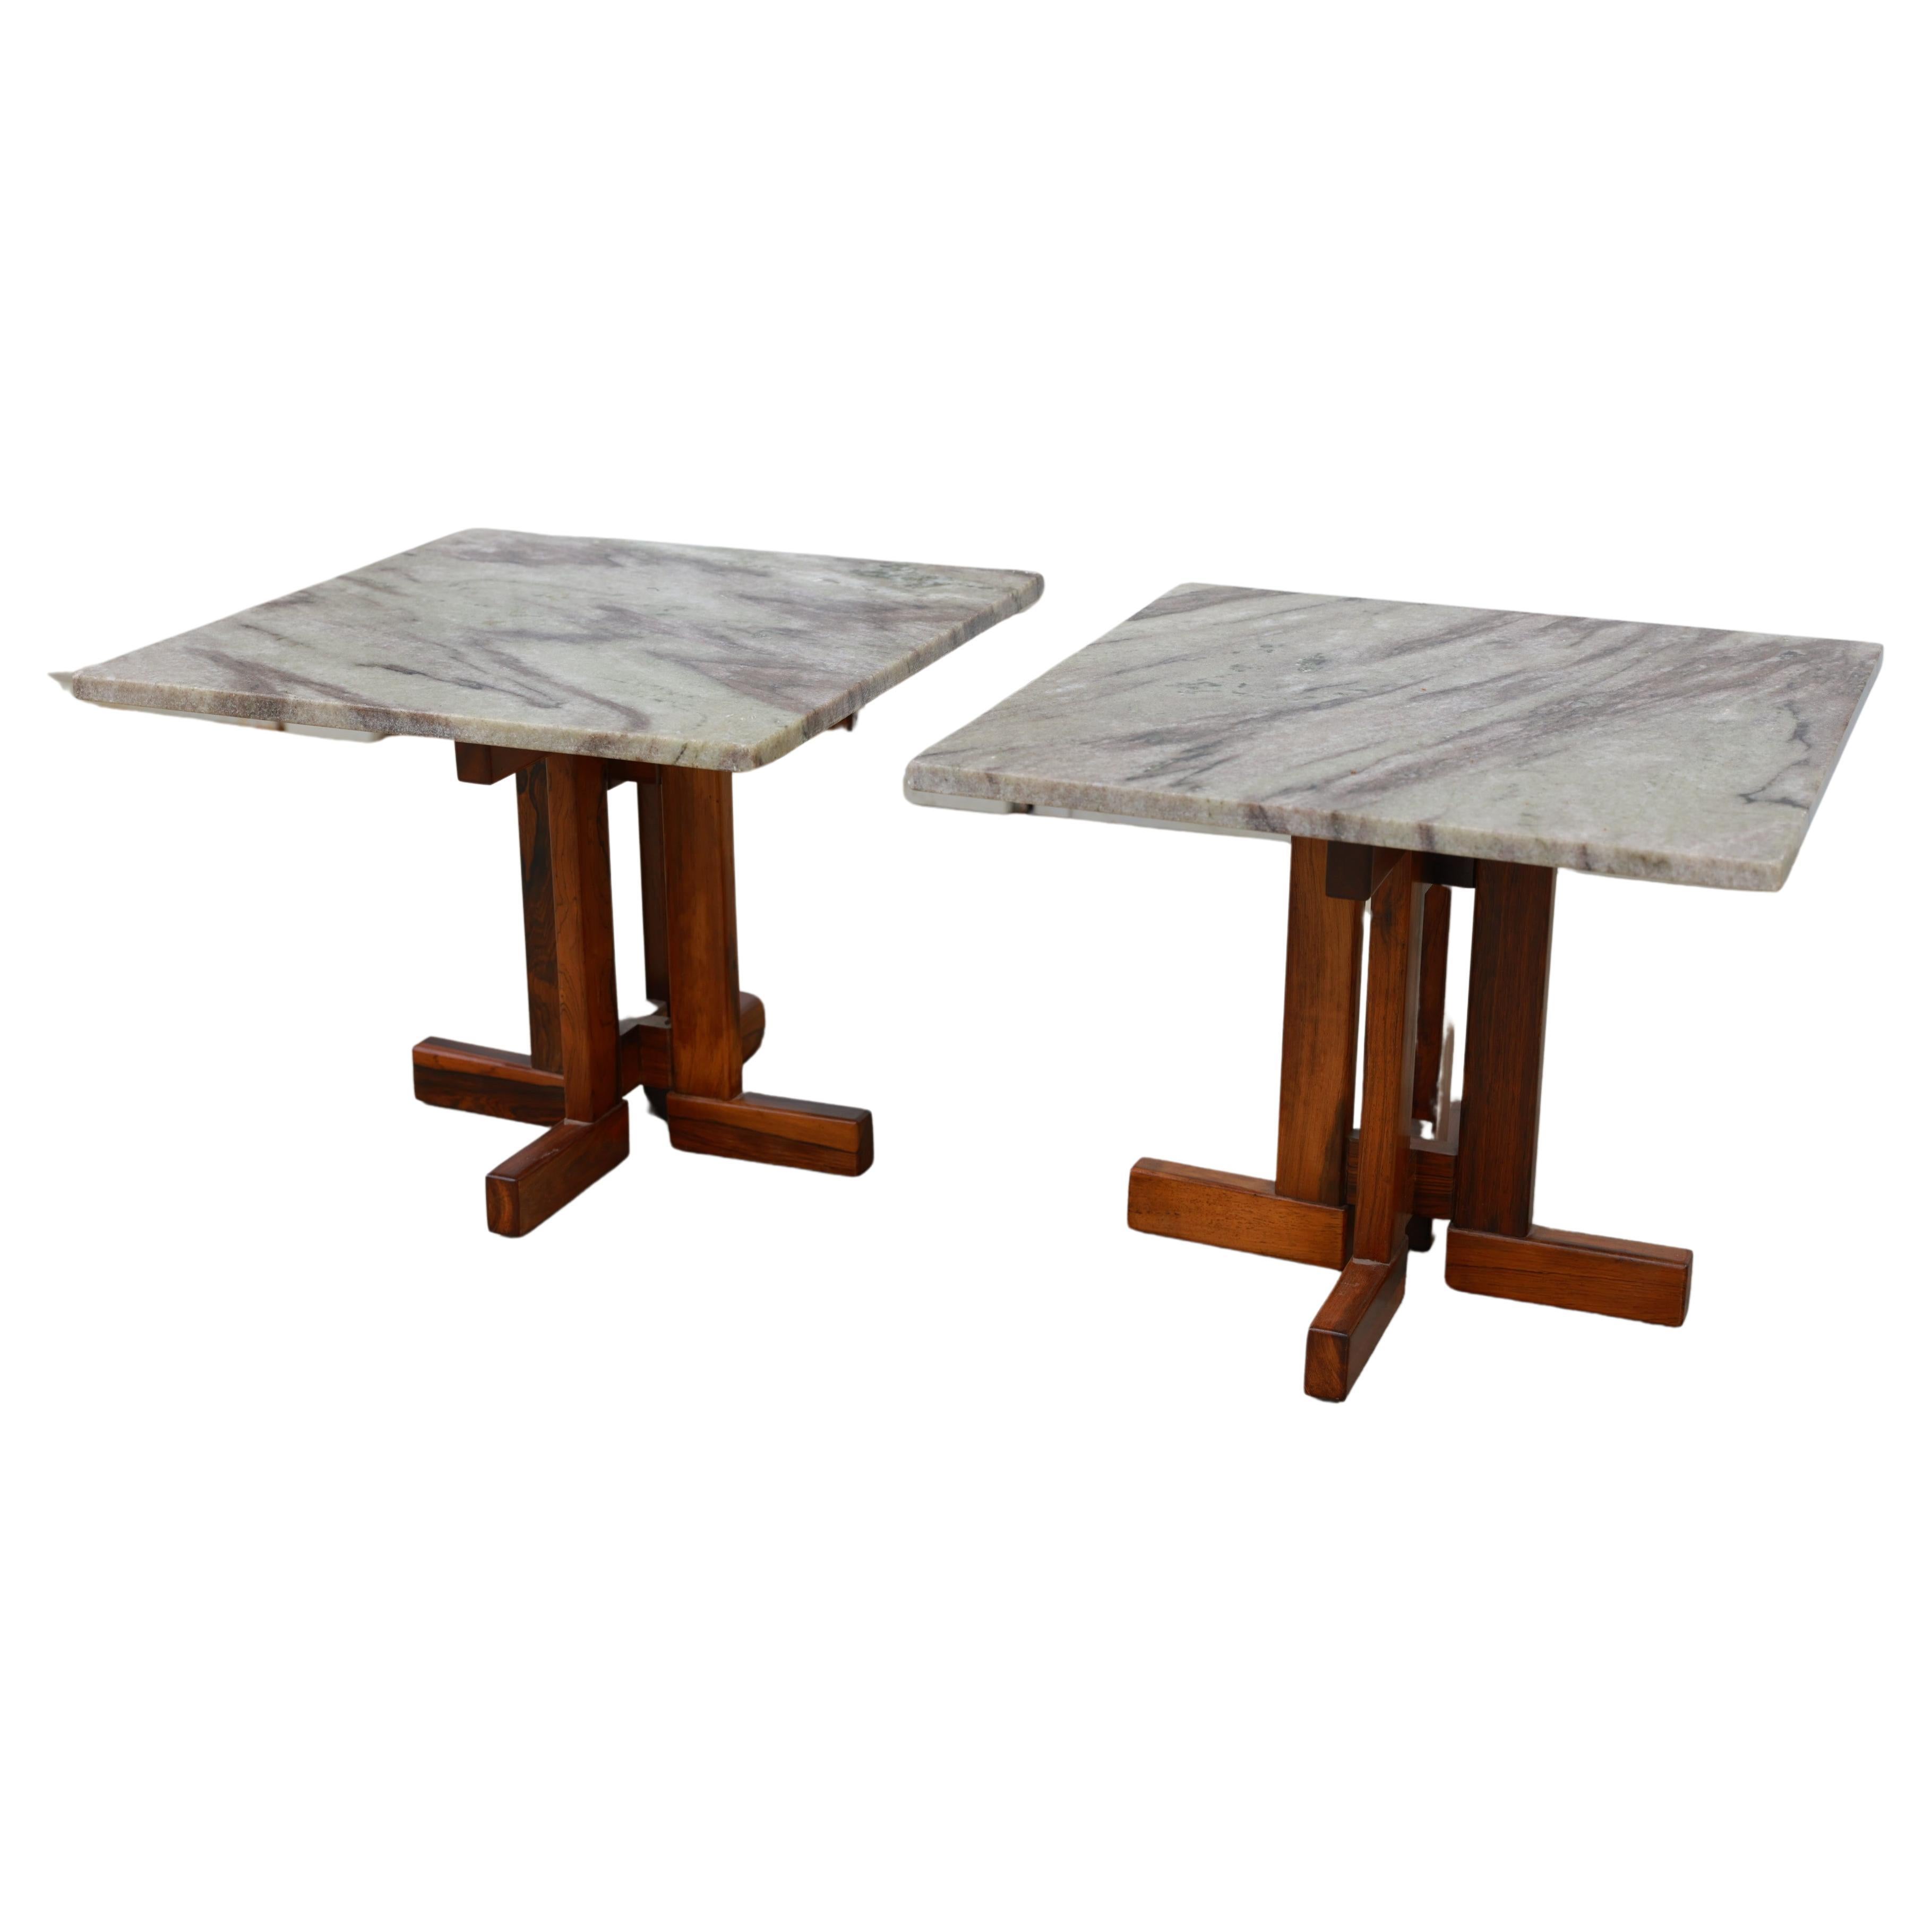 Brazilian Modern Pair of Side Tables in Rosewood and Granite by Celina, c. 1960 For Sale